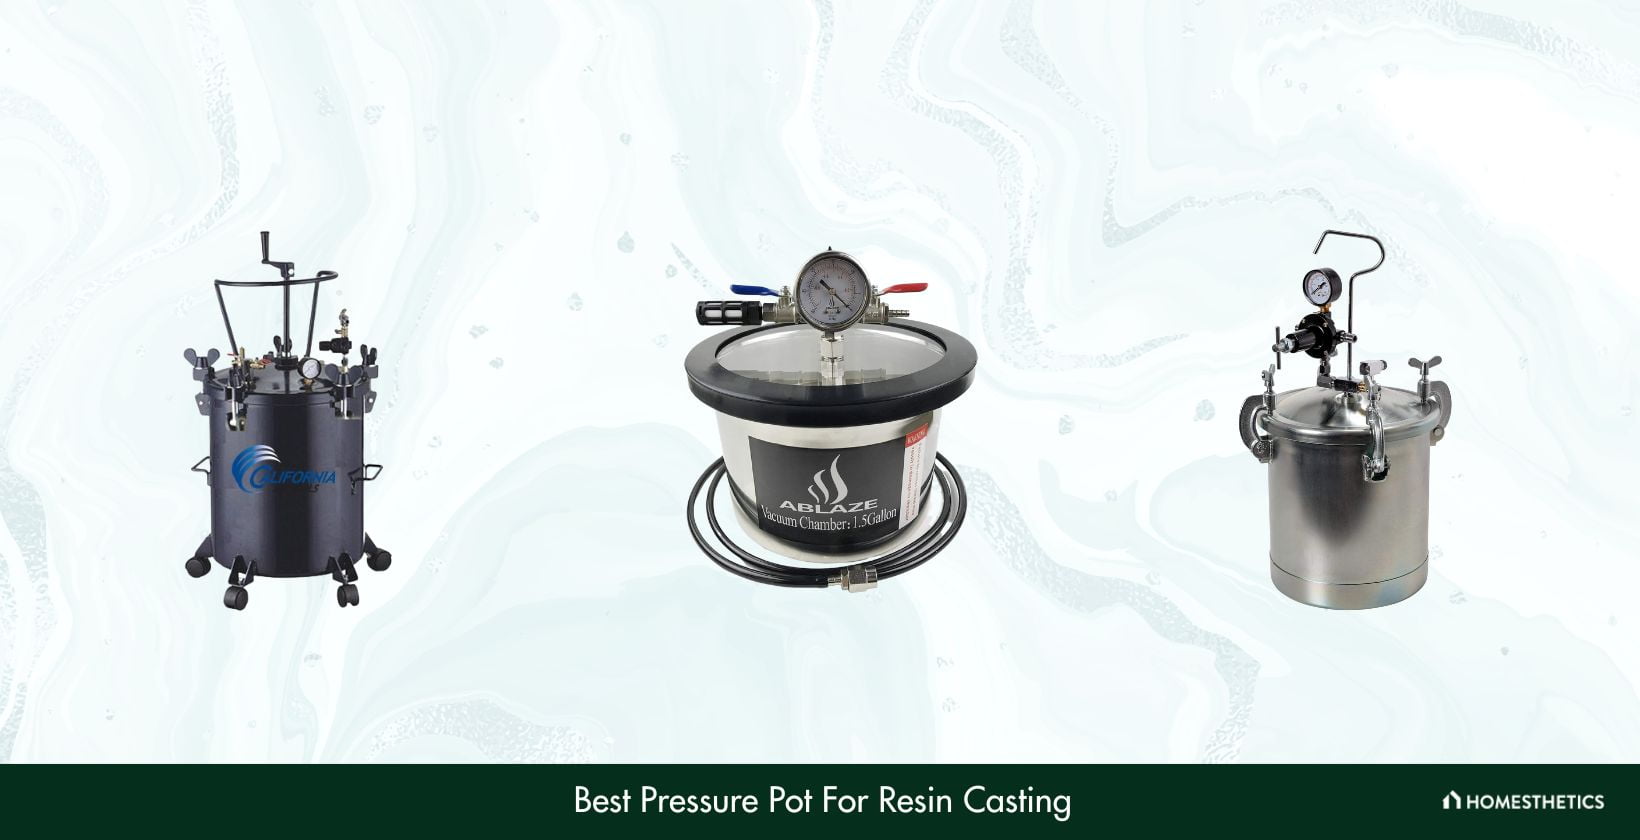 5 Best Pressure Pot For Resin Casting Right Now